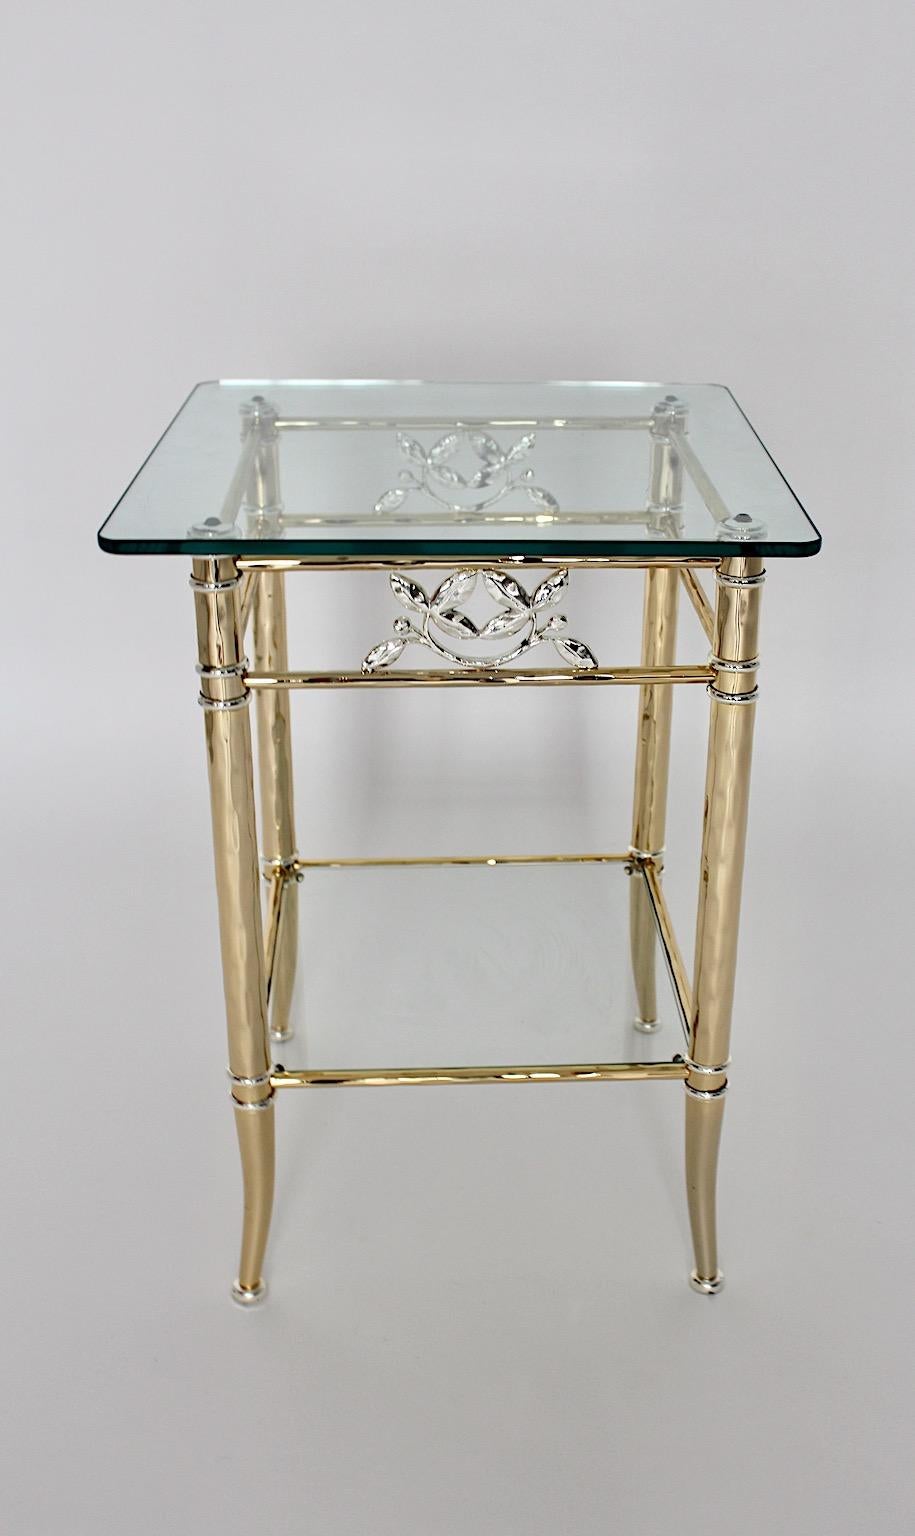 Hollywood Regency Style Freestanding Gold Silver Metal Side Table 1970s Italy For Sale 6